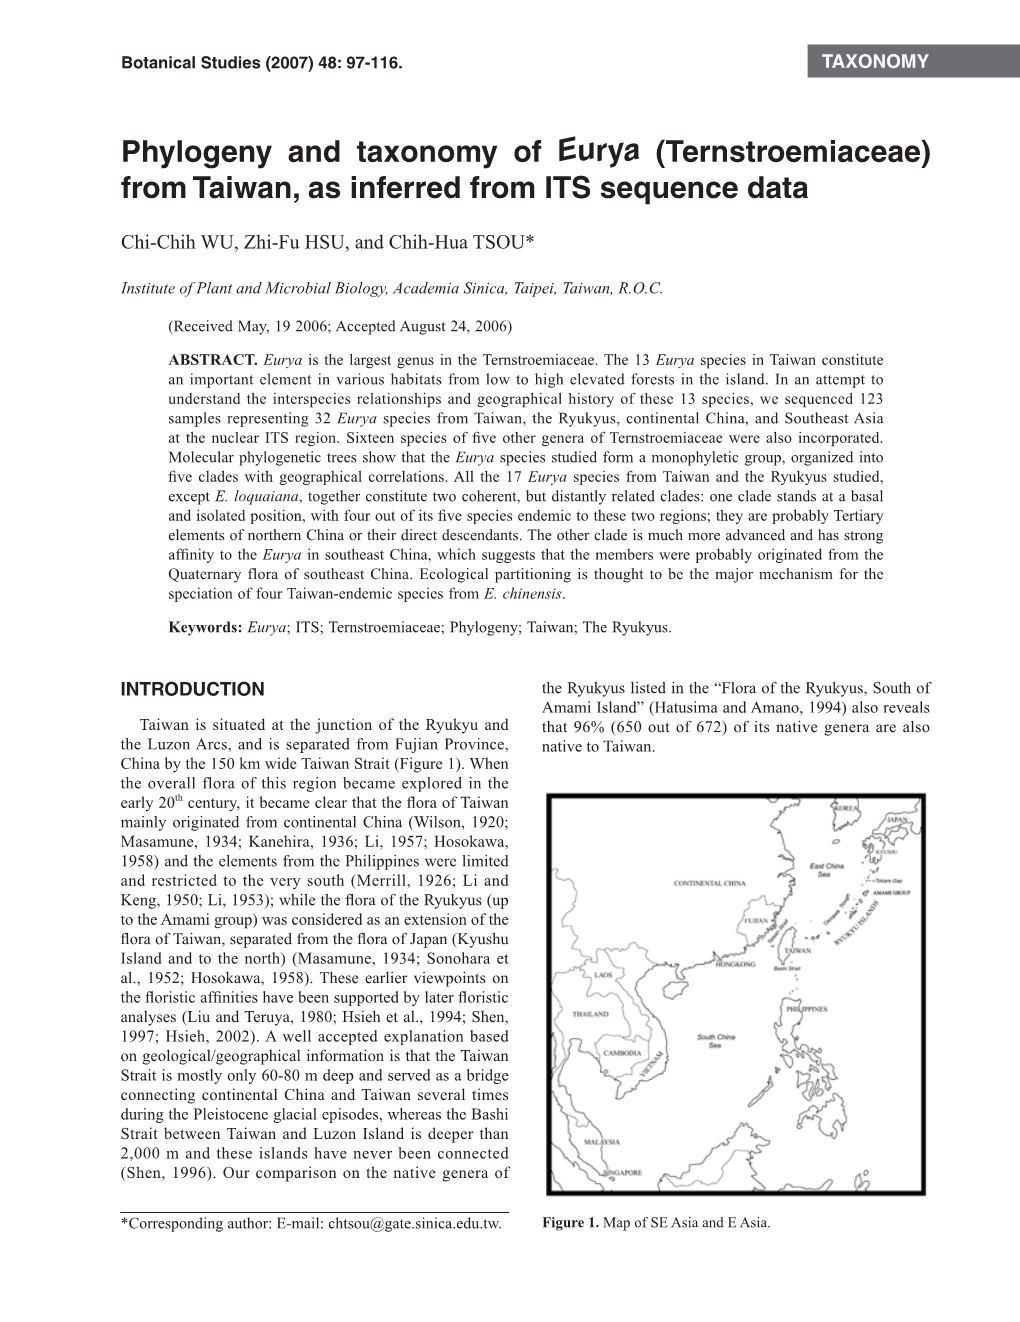 Phylogeny and Taxonomy of Eurya (Ternstroemiaceae) from Taiwan, As Inferred from ITS Sequence Data